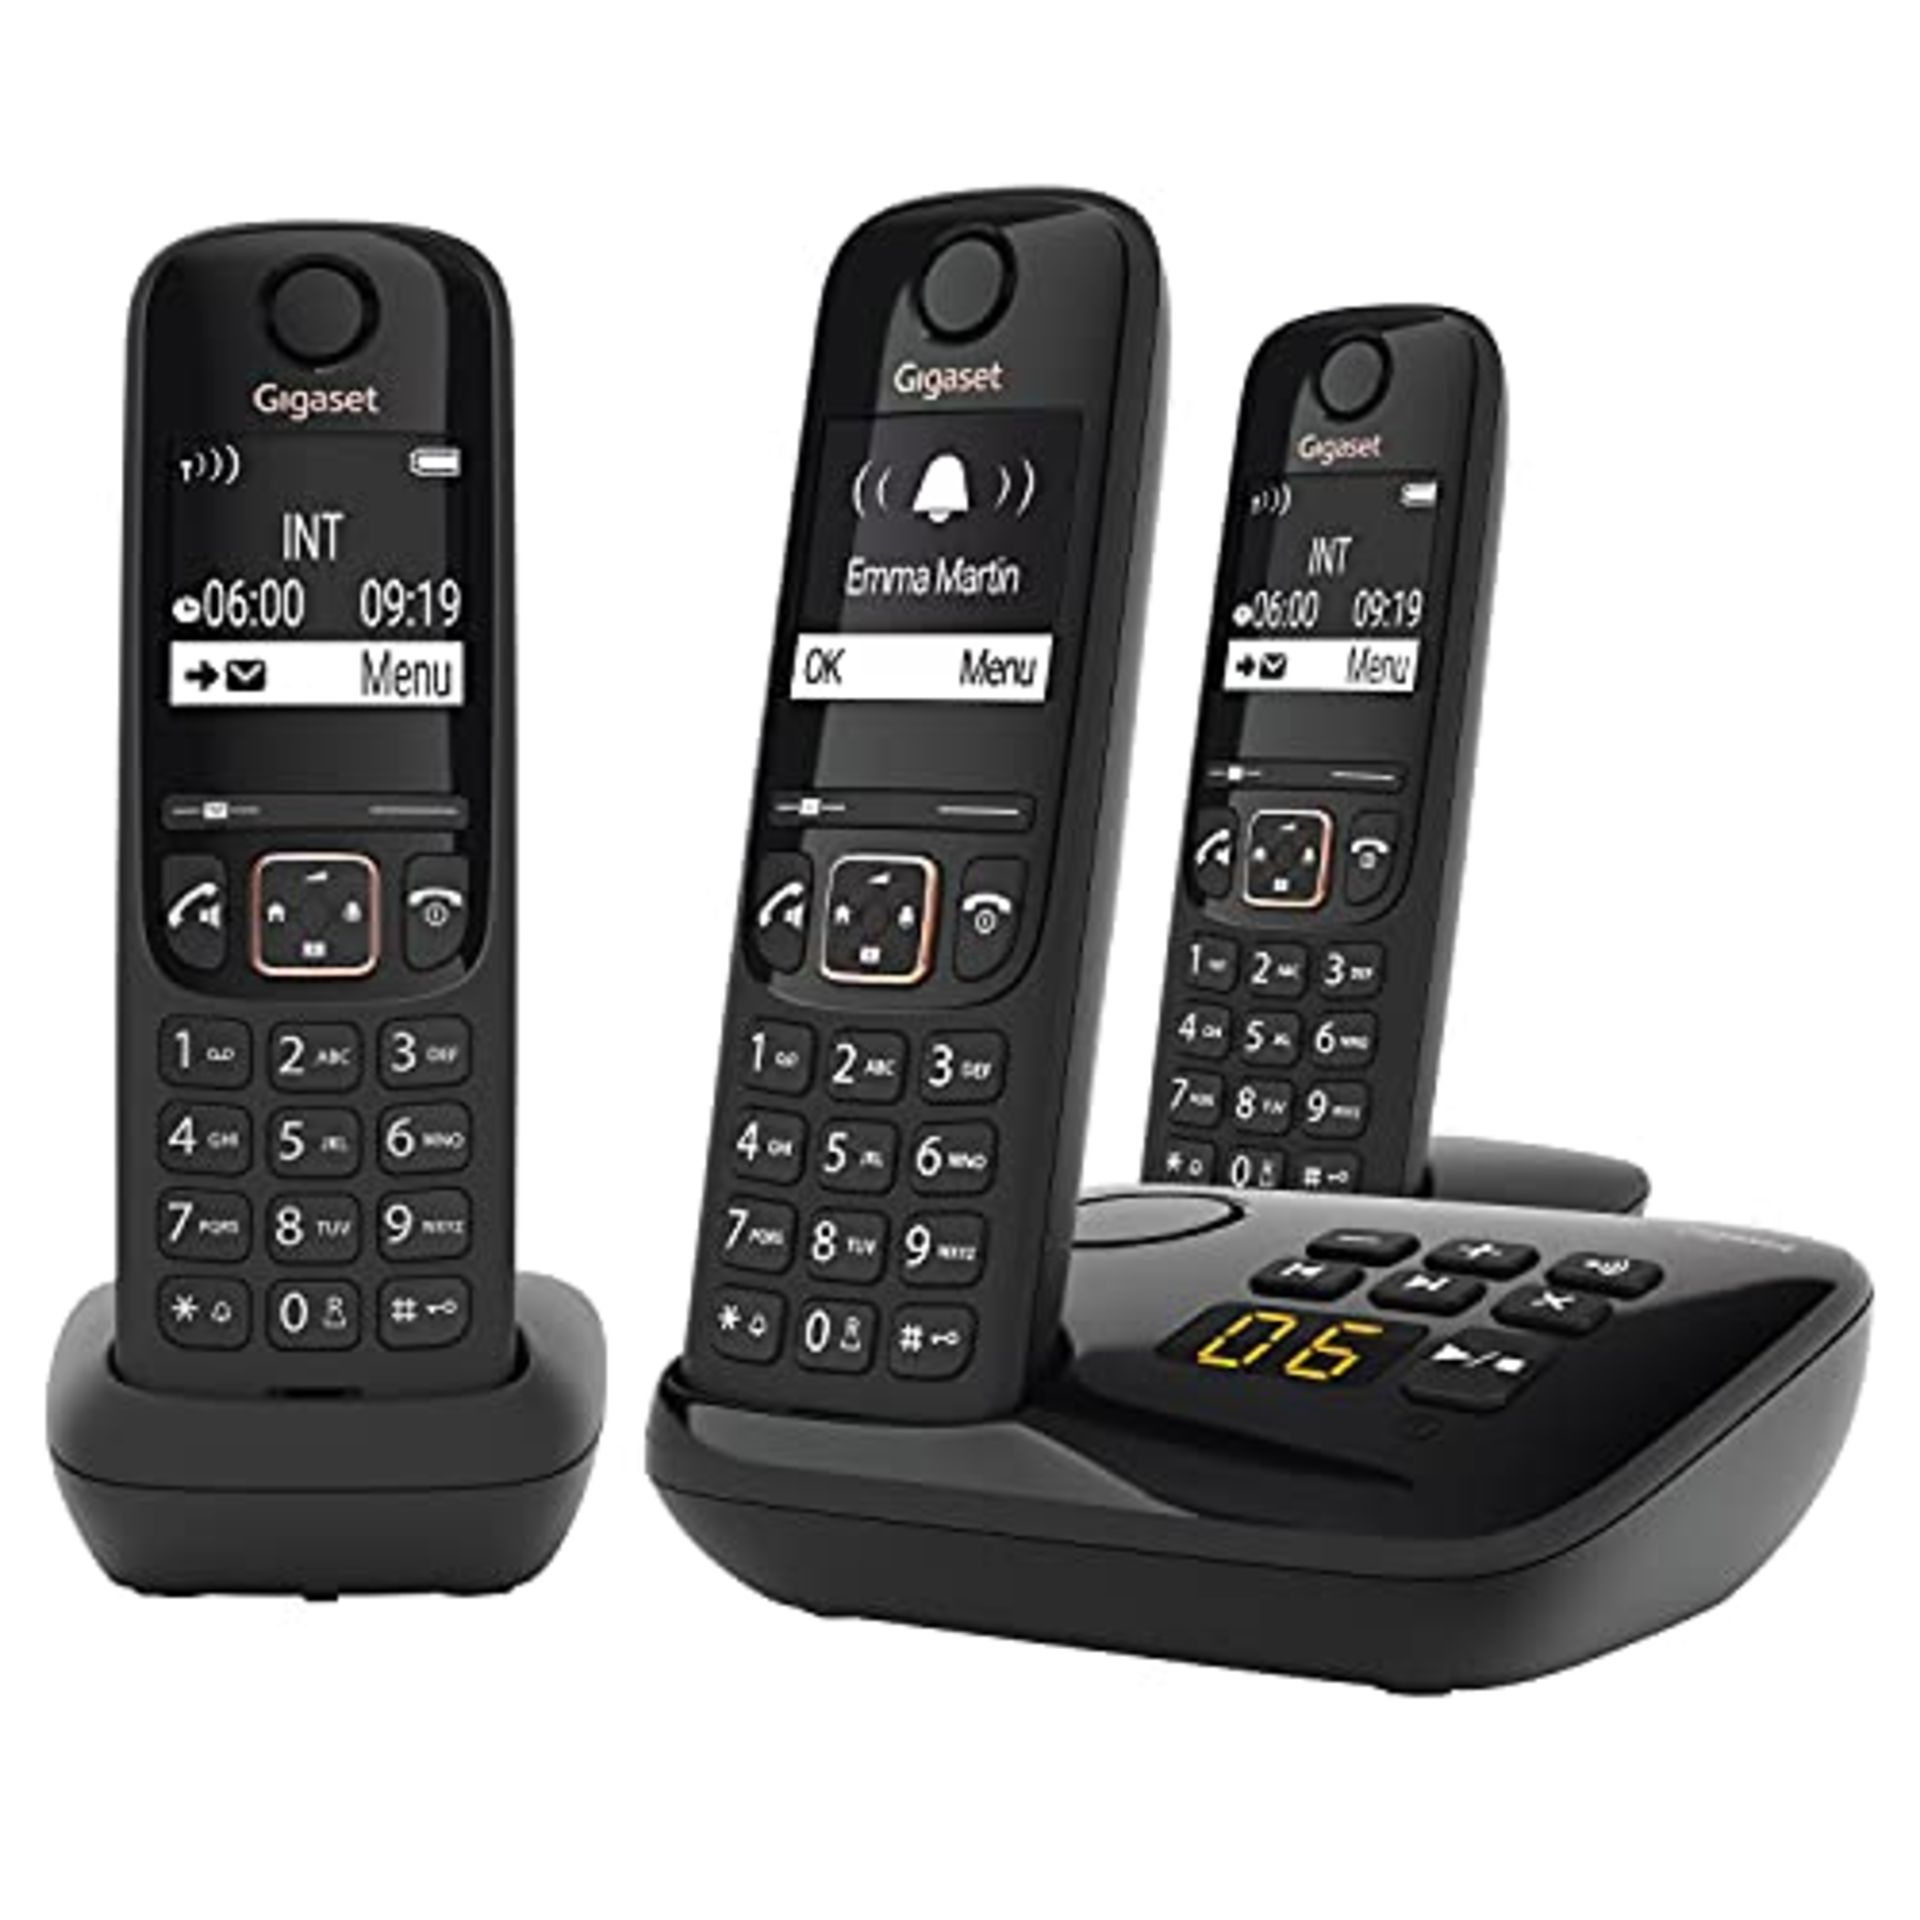 Gigaset AS690 - Cordless DECT Telephone - large, high-contrast display - brilliant aud - Image 3 of 4